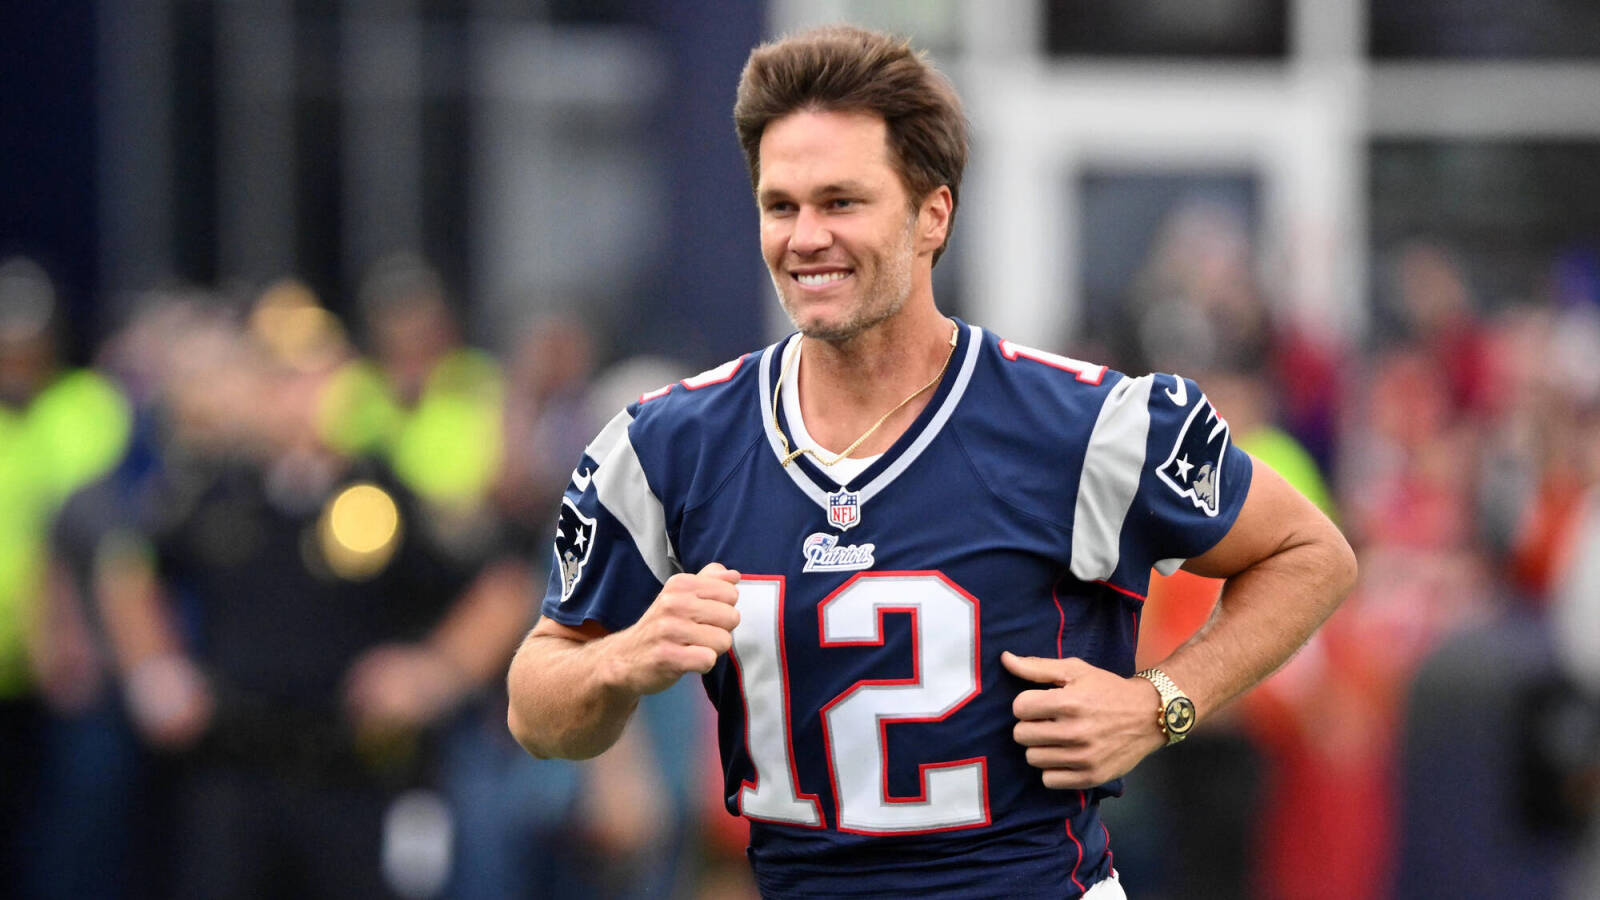 Tom Brady opens up about devastating Super Bowl loss